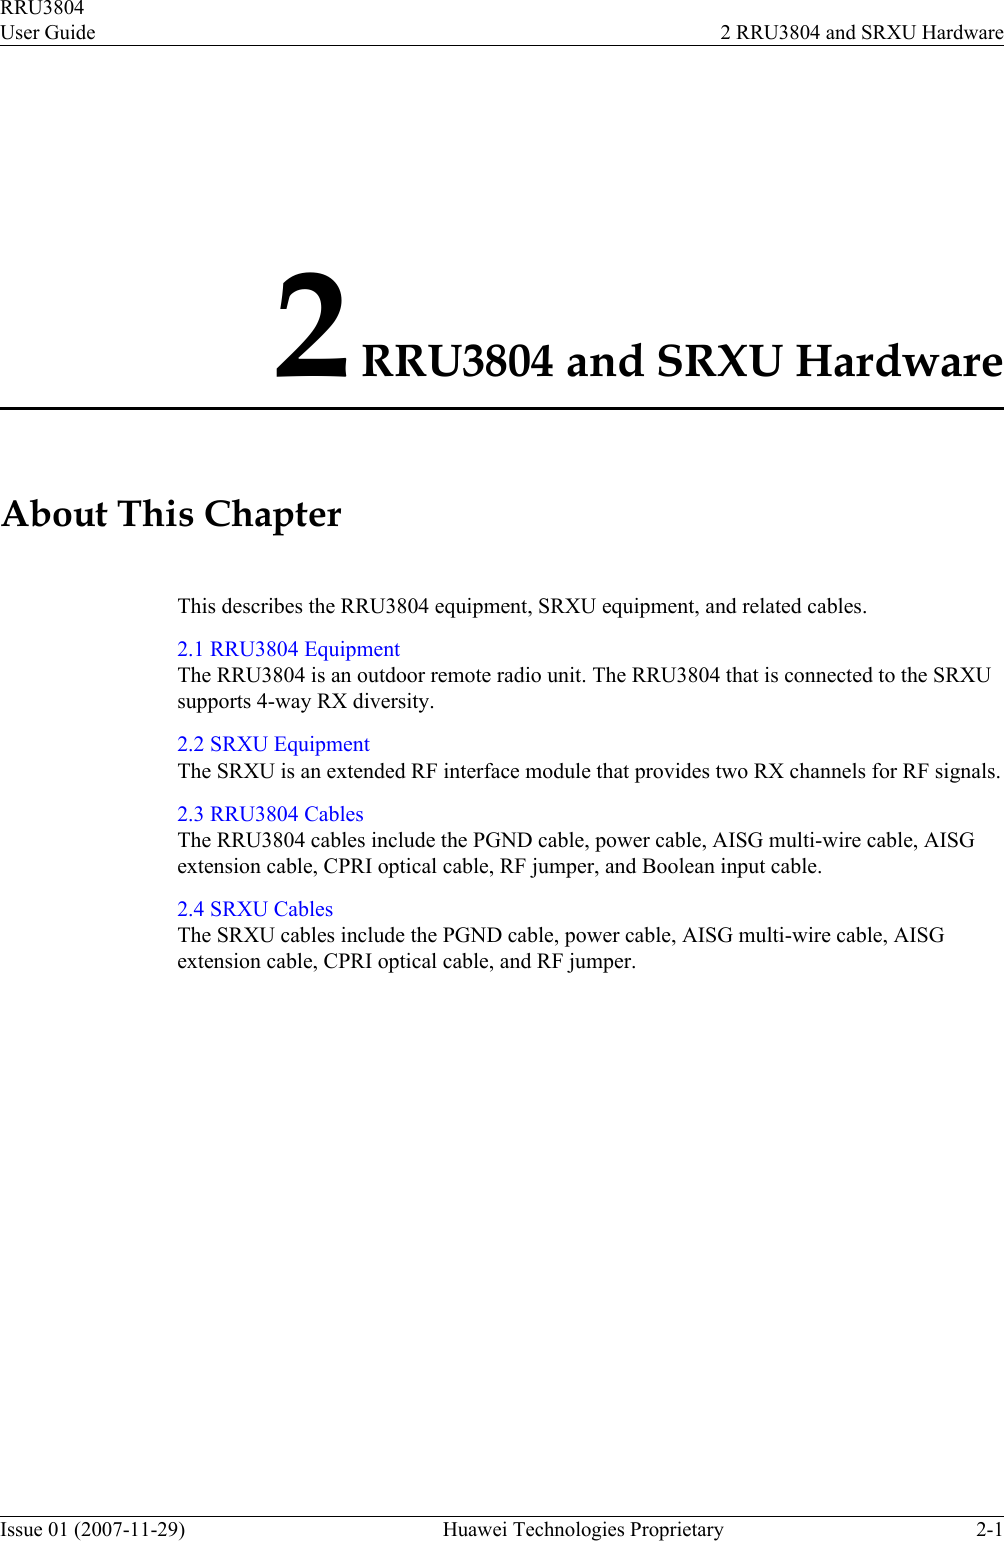 2 RRU3804 and SRXU HardwareAbout This ChapterThis describes the RRU3804 equipment, SRXU equipment, and related cables.2.1 RRU3804 EquipmentThe RRU3804 is an outdoor remote radio unit. The RRU3804 that is connected to the SRXUsupports 4-way RX diversity.2.2 SRXU EquipmentThe SRXU is an extended RF interface module that provides two RX channels for RF signals.2.3 RRU3804 CablesThe RRU3804 cables include the PGND cable, power cable, AISG multi-wire cable, AISGextension cable, CPRI optical cable, RF jumper, and Boolean input cable.2.4 SRXU CablesThe SRXU cables include the PGND cable, power cable, AISG multi-wire cable, AISGextension cable, CPRI optical cable, and RF jumper.RRU3804User Guide 2 RRU3804 and SRXU HardwareIssue 01 (2007-11-29)  Huawei Technologies Proprietary 2-1